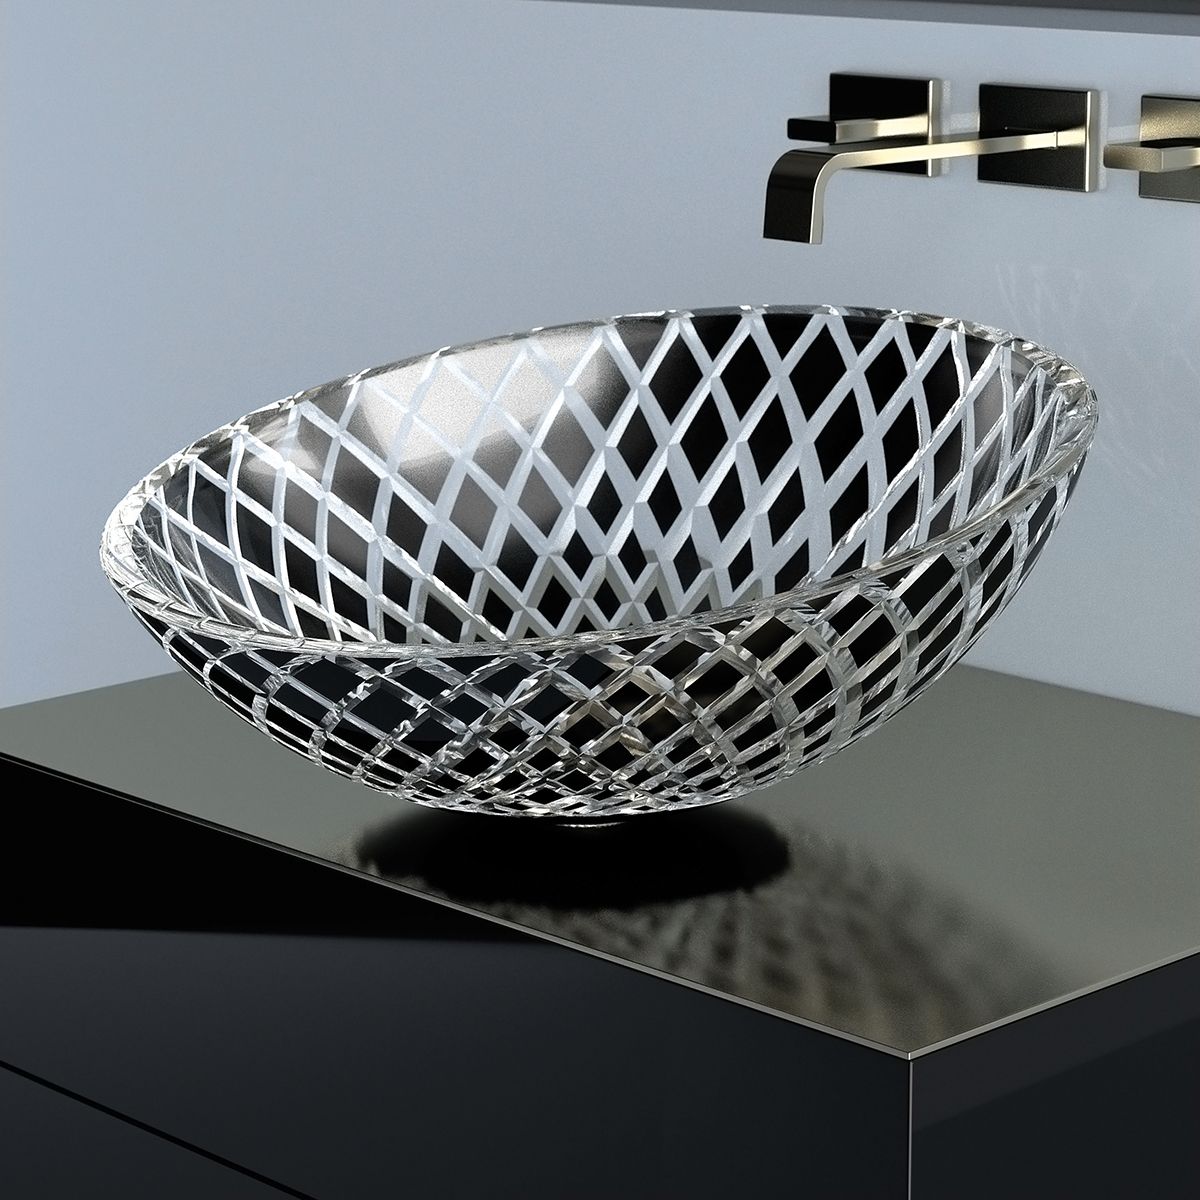 The Many Variations of Glass Vessel Sinks